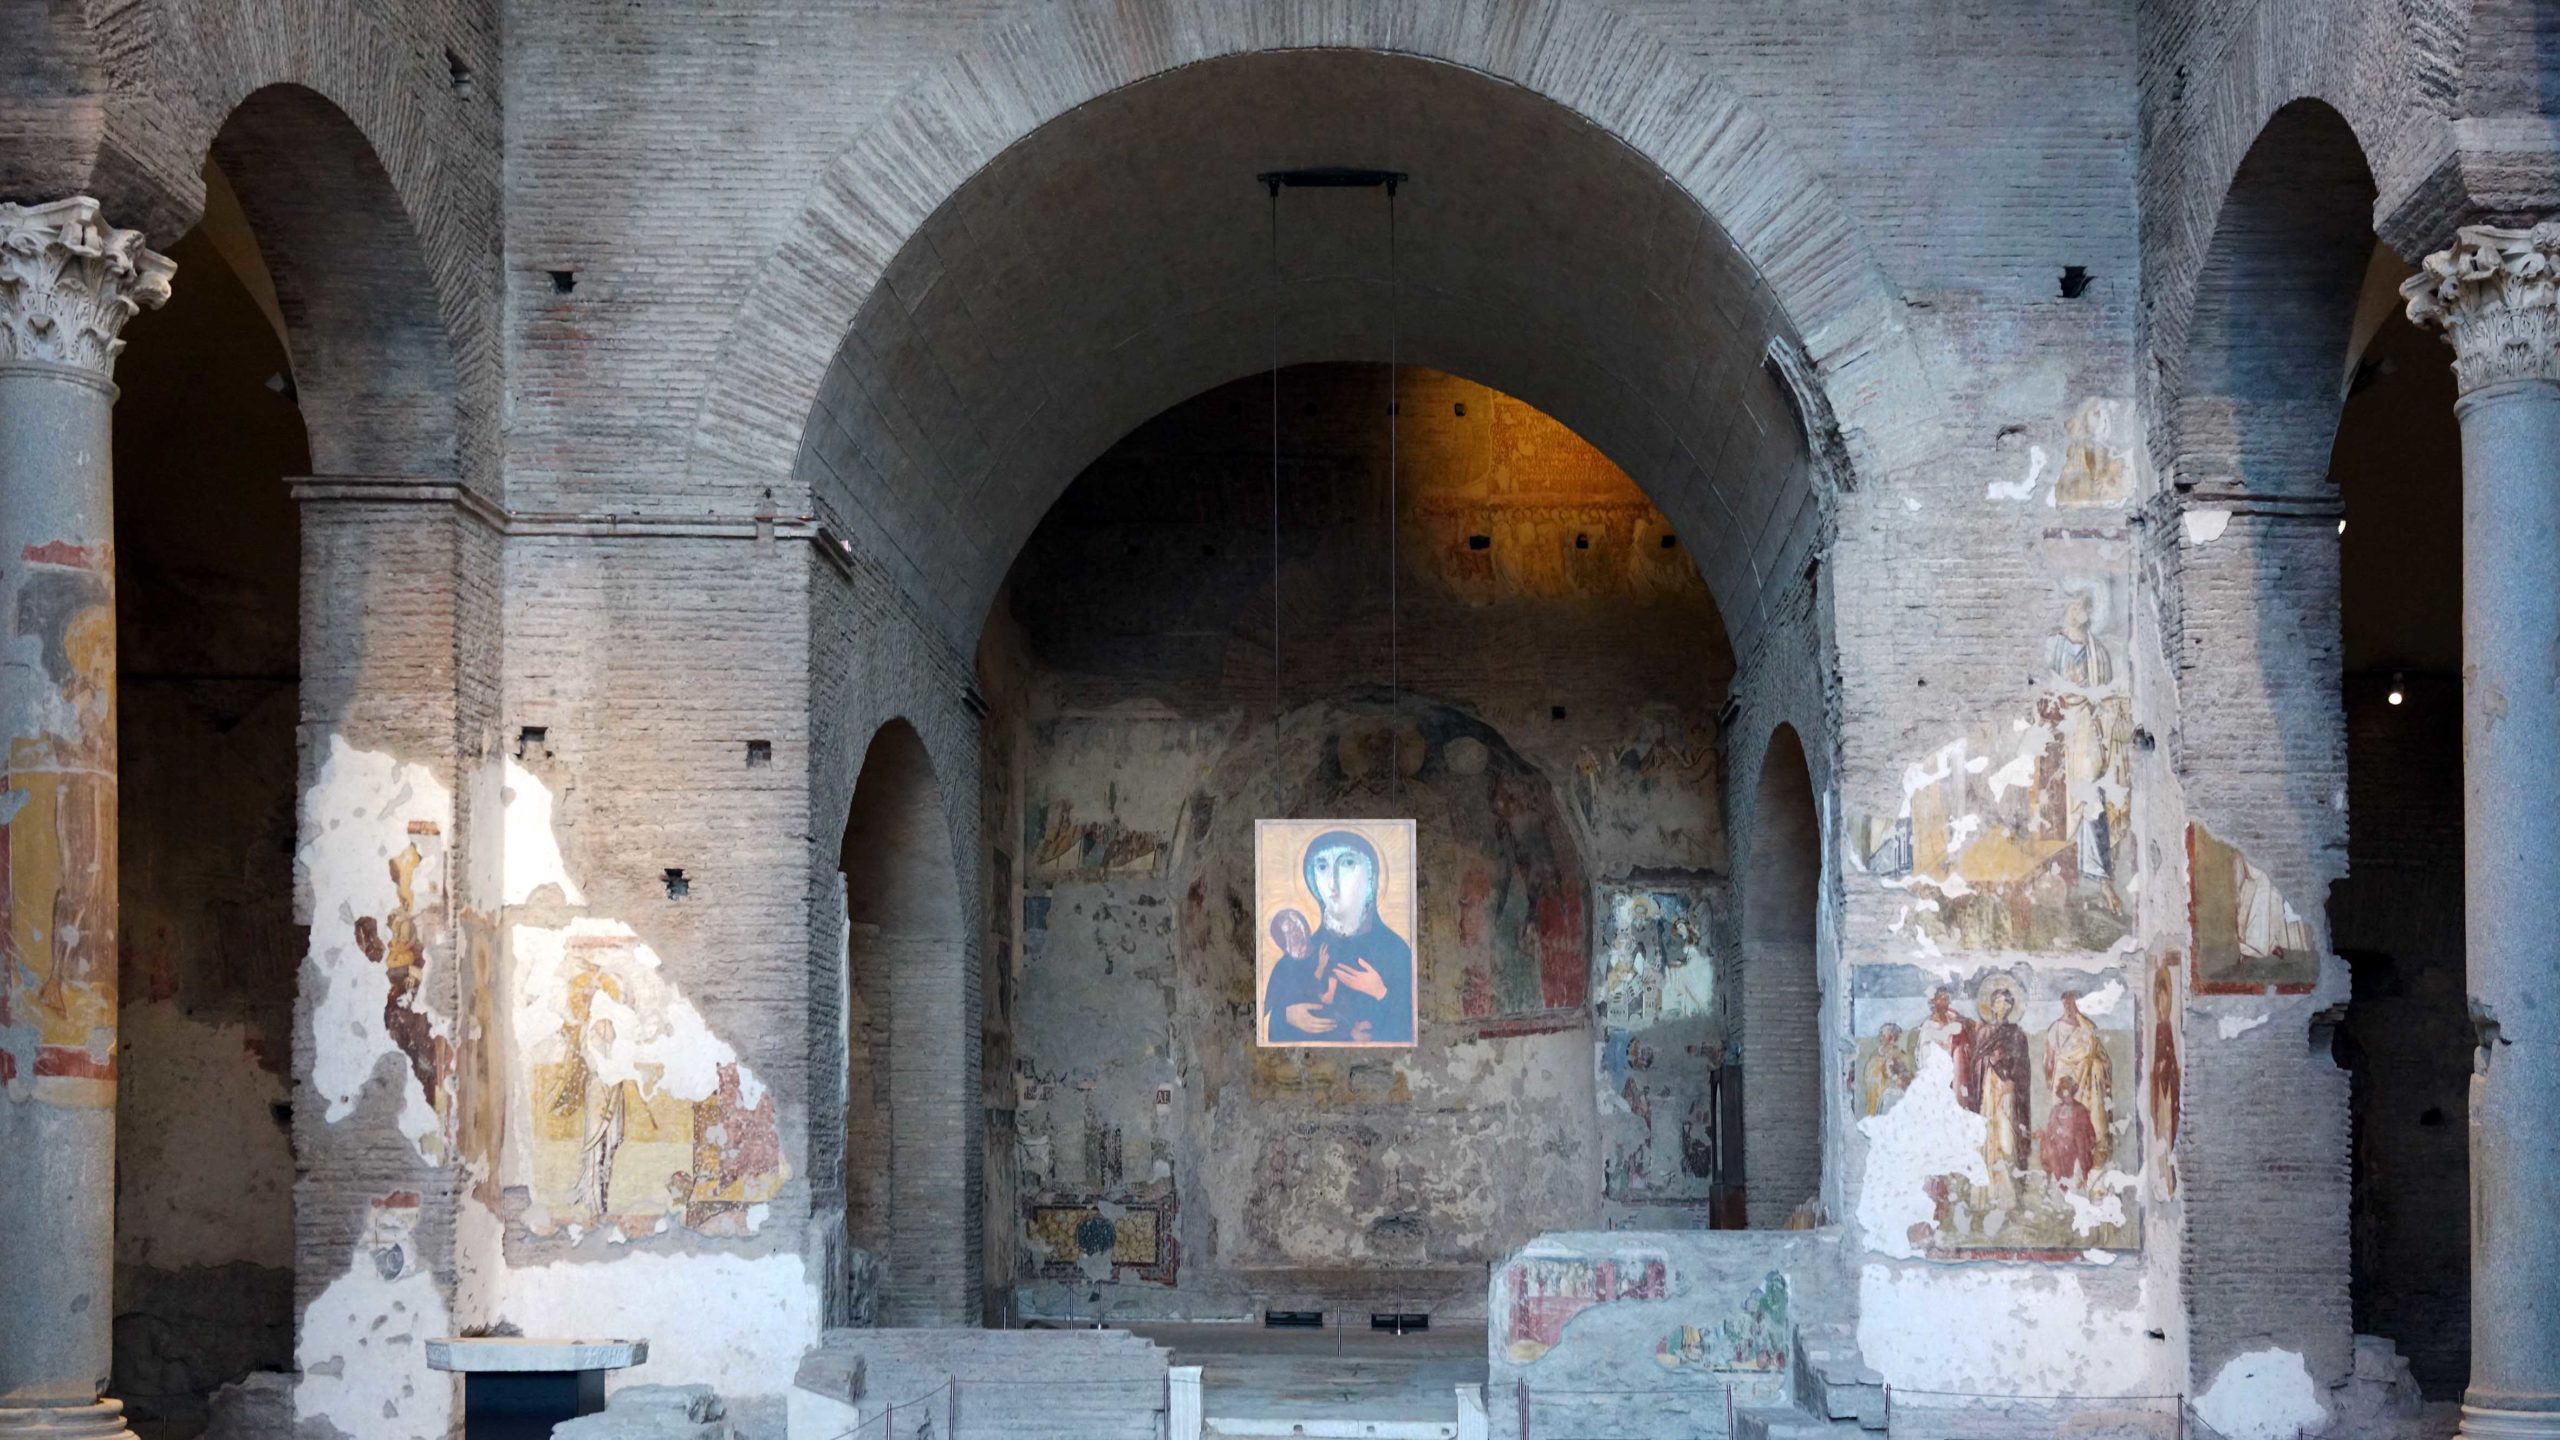 Reproduction of the Virgin Hodegetria in Santa Maria Antiqua, consecrated in the 6th century and located at the foot of the Palatine Hill beside the Roman Forum (originally part of the Roman emperor Domitian's palace complex of c. 81-96 C.E.), consecrated in the 6th century with paintings from the 6th, 7th, and 8th centuries